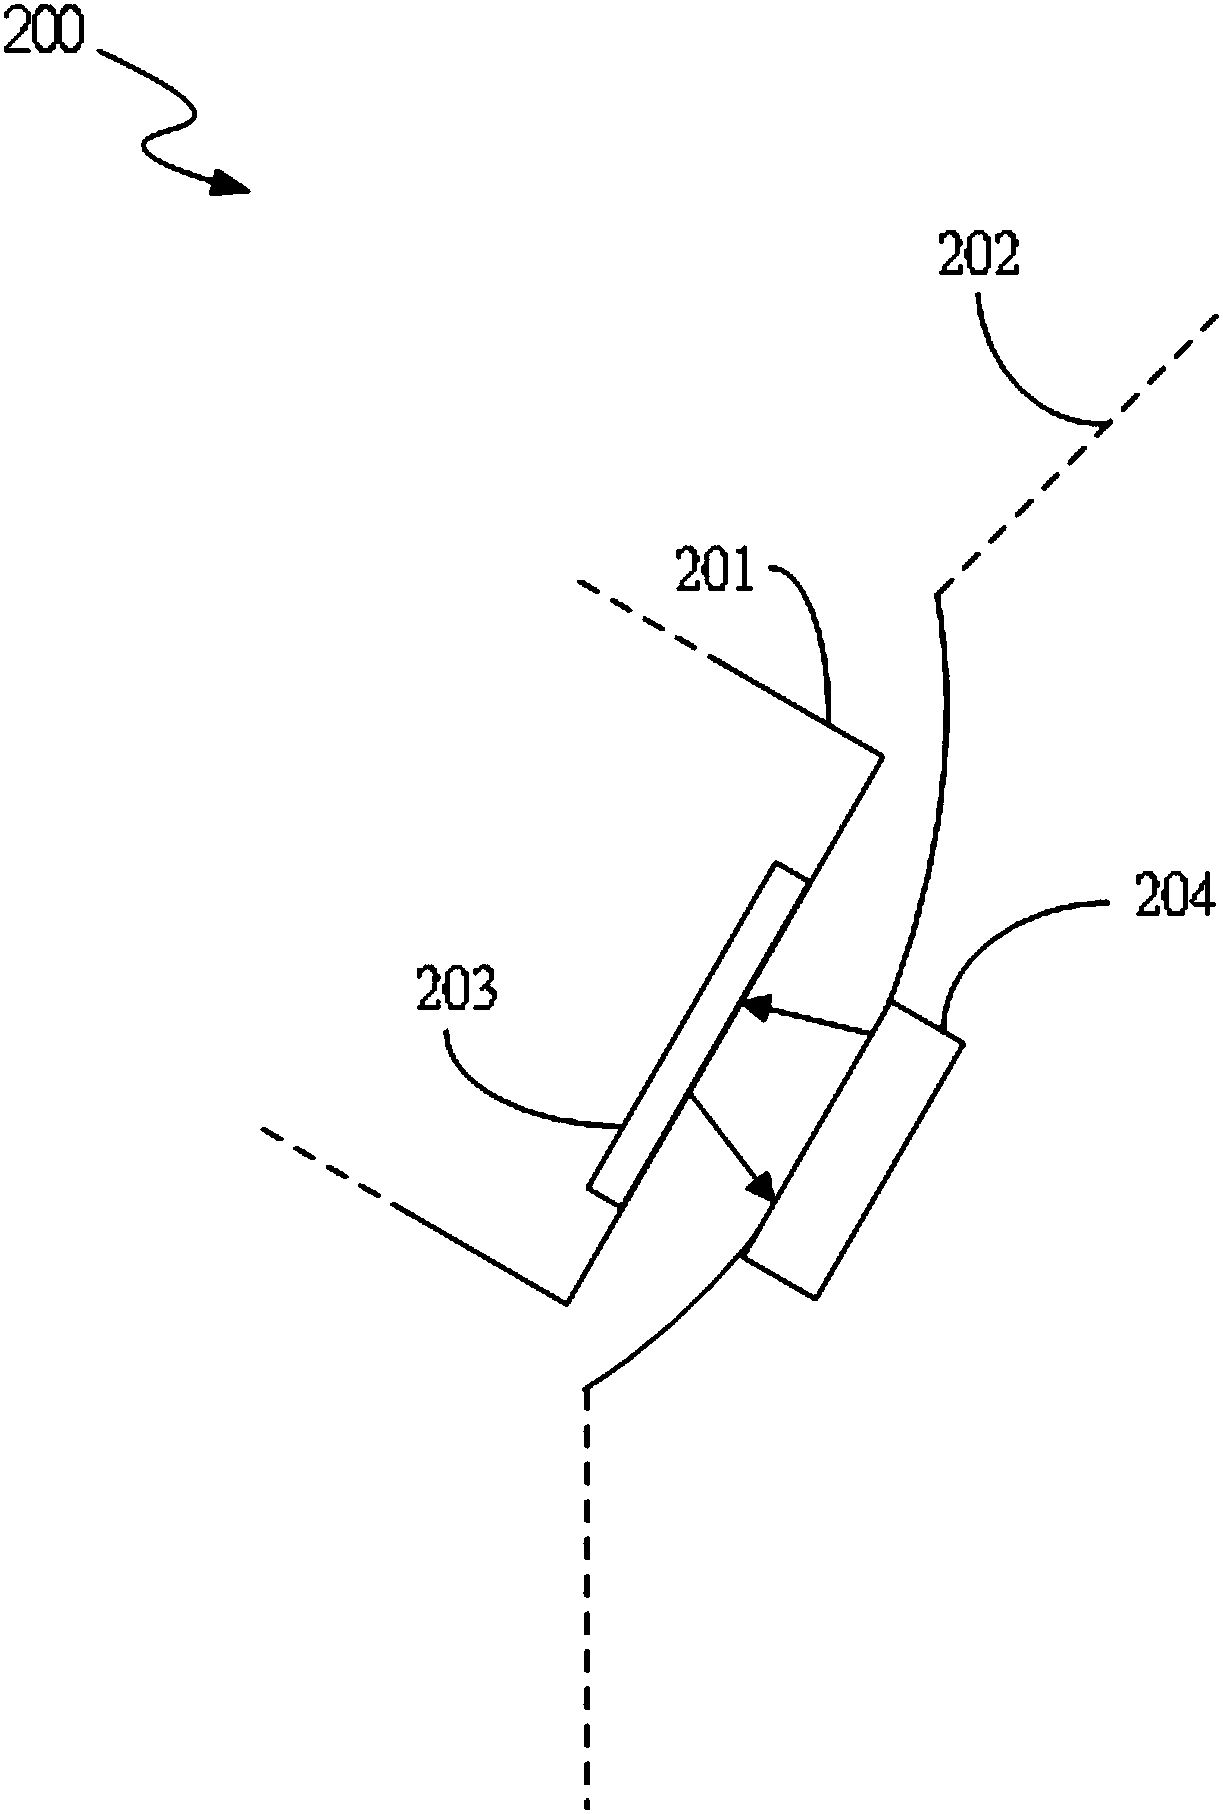 Test equipment and method thereof used for non-invasive blood analytical instrument